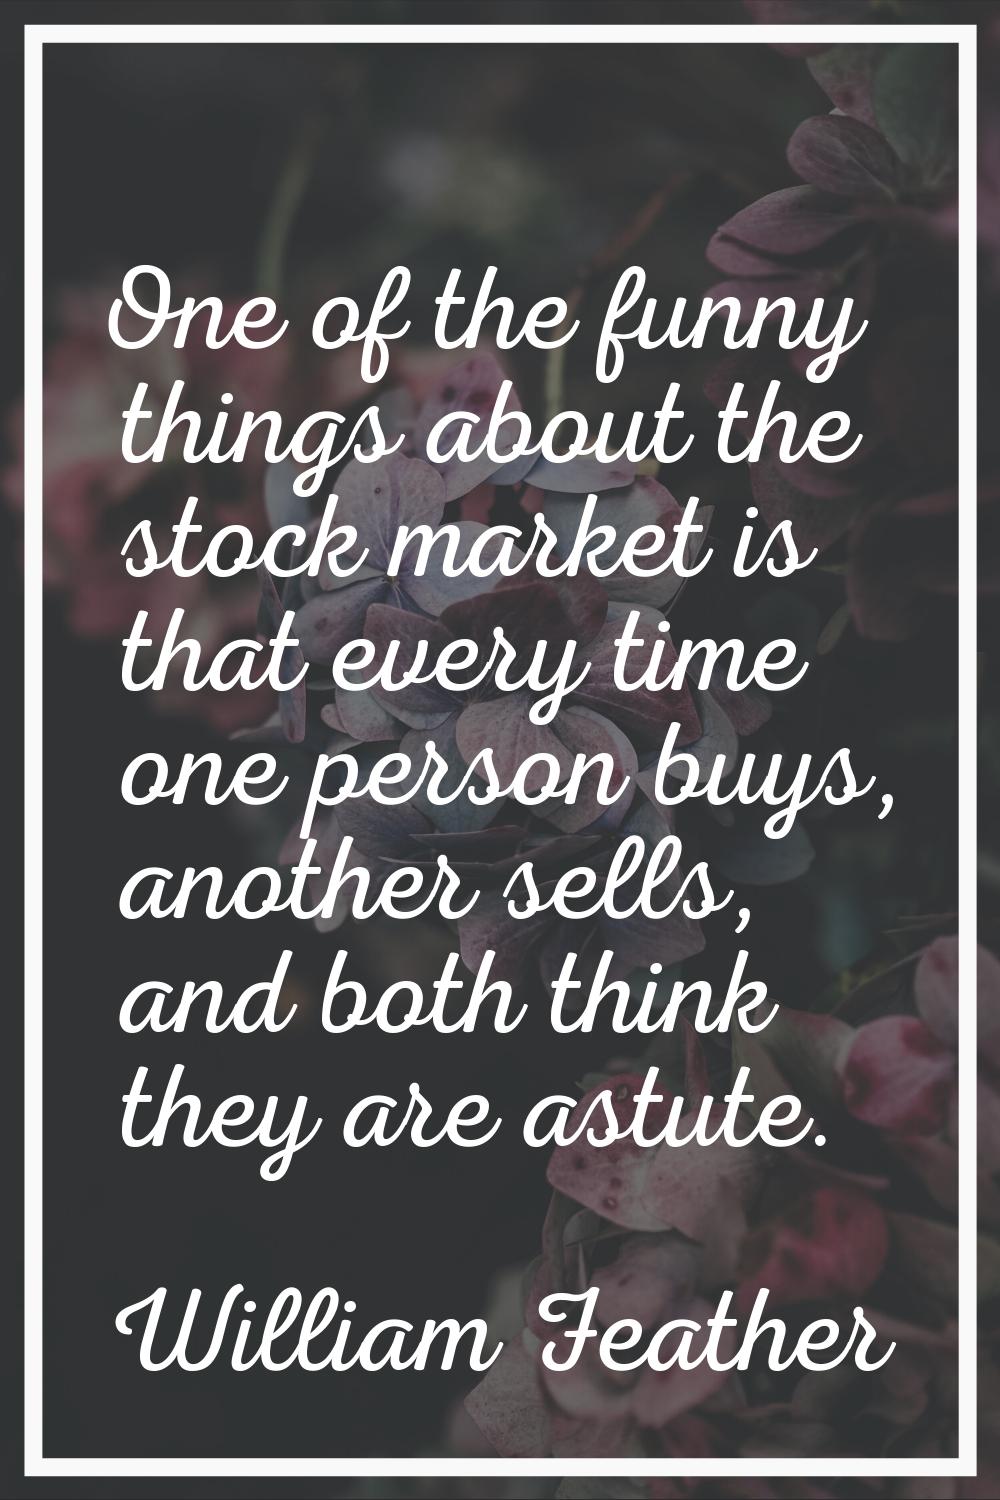 One of the funny things about the stock market is that every time one person buys, another sells, a